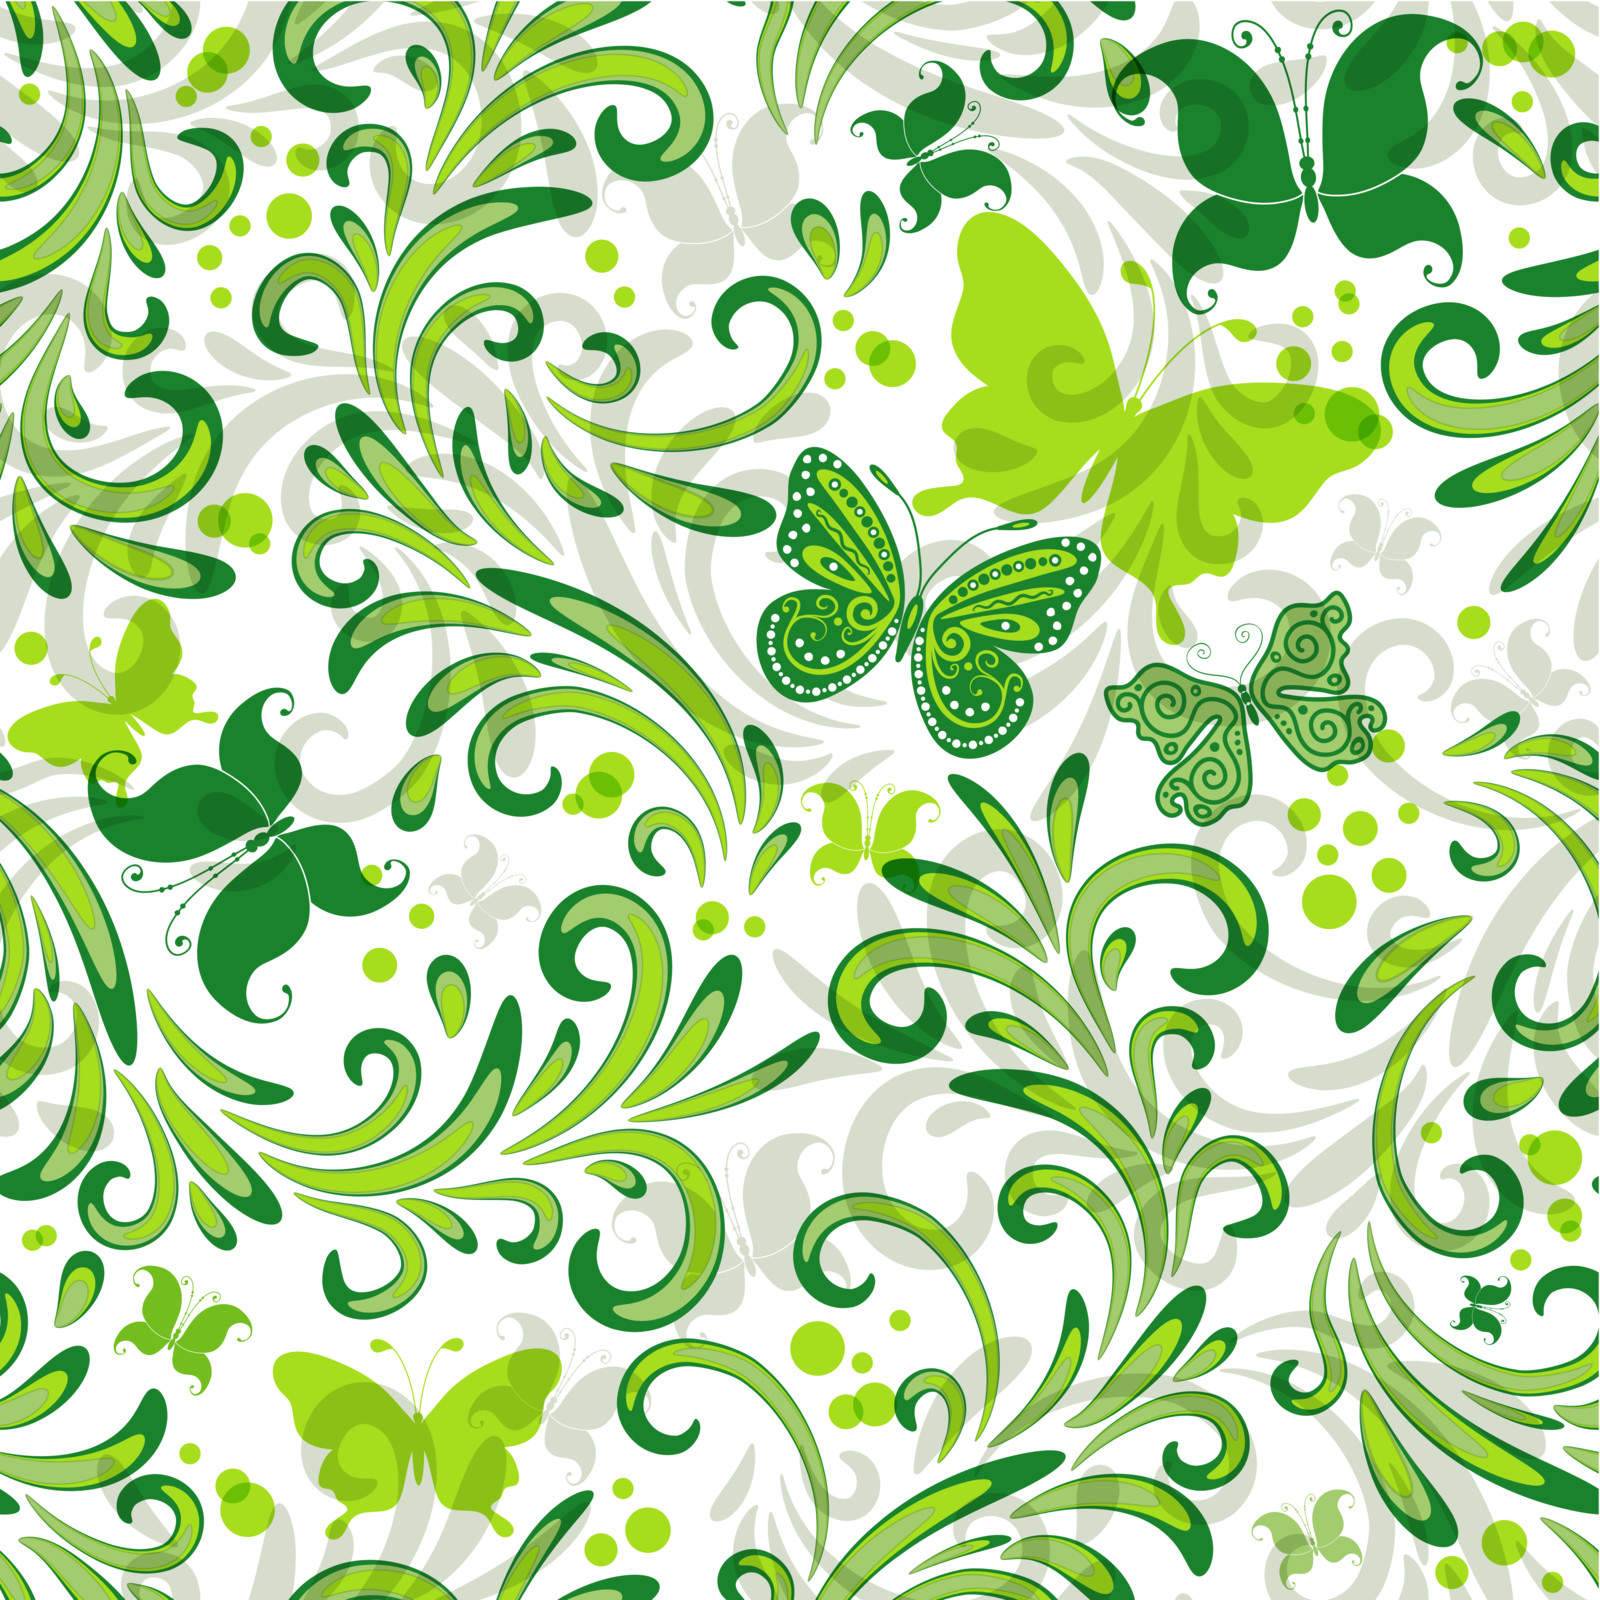 White repeating floral pattern with green curls and butterflies (vector EPS 10)